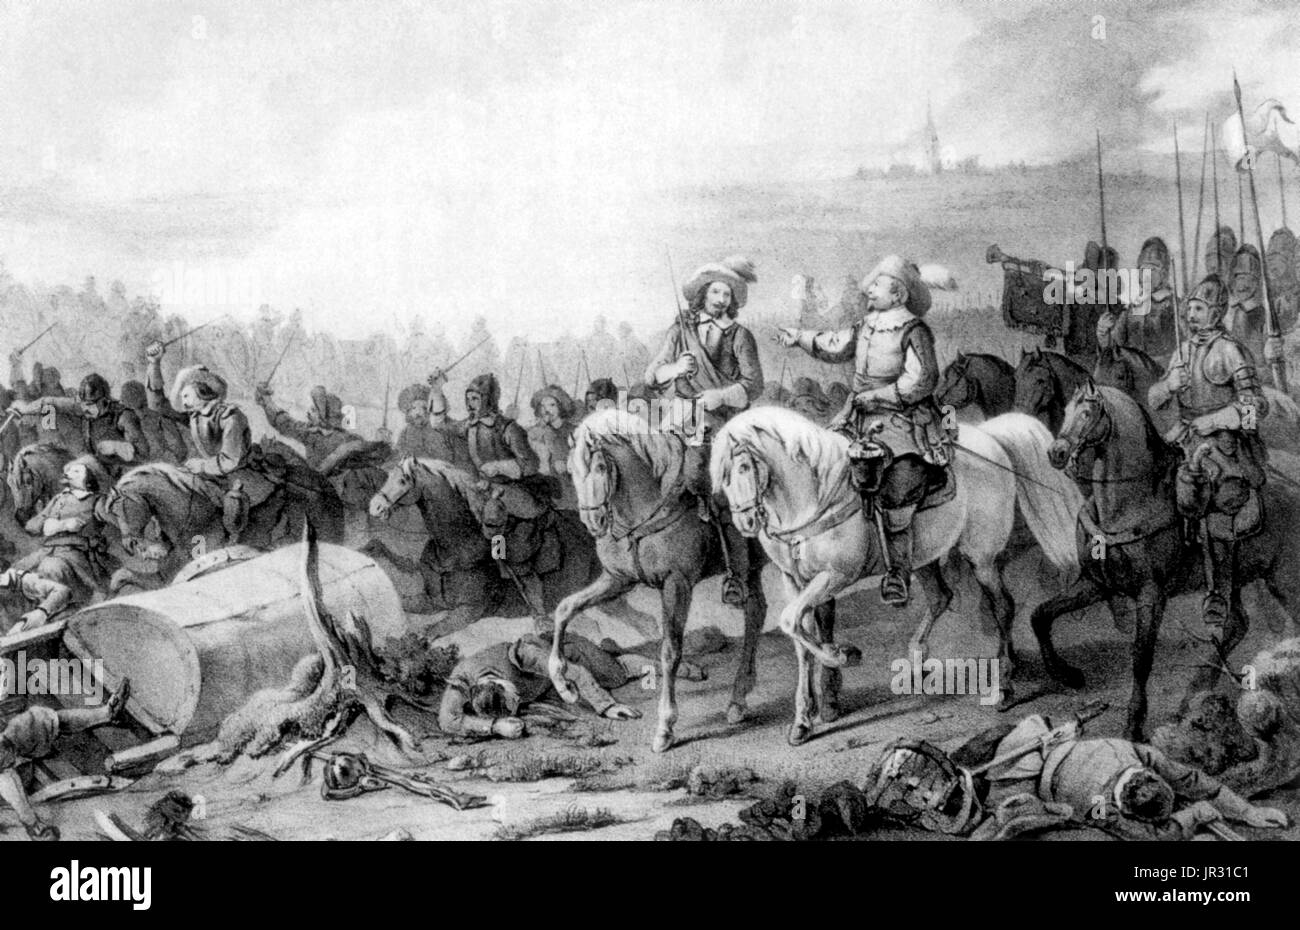 The Battle of Breitenfeld was fought at a crossroads near the walled city of Leipzig on September 17, 1631. The battle lasted over six hours. The first two hours consisted of an exchange of artillery fire, followed by an Imperial attack with cavalry from both wings to both ends of the Protestant line. The cavalry attack routed the Saxon troops on the Swedish left flank. The imperial army conducted a general attack to exploit the exposed left flank. The Swedes repositioned their second line to cover the left flank and counterattacked with their cavalry. The attack on the Imperial left was led p Stock Photo